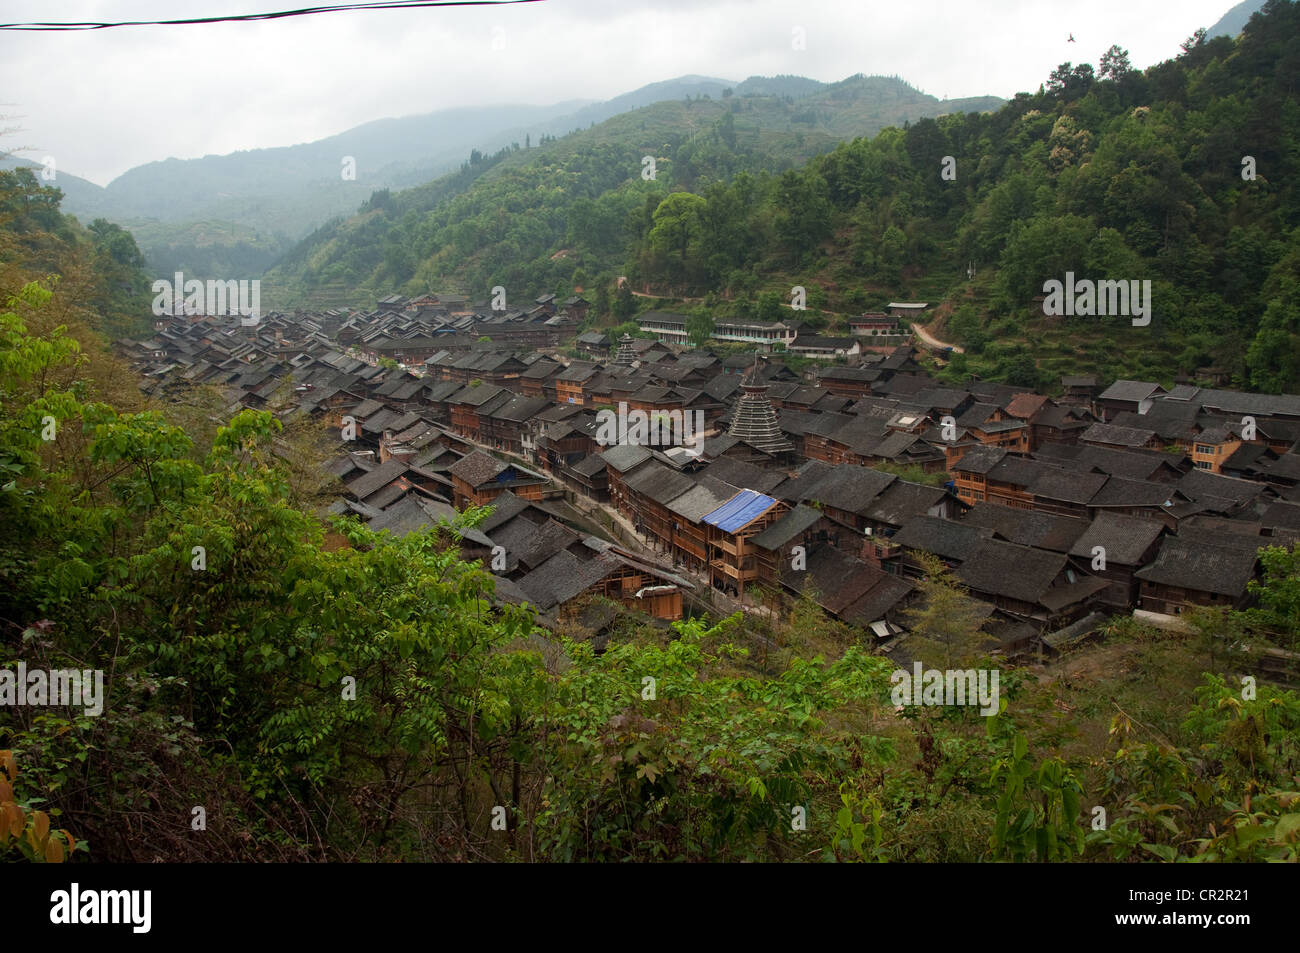 Zhaoxing Dong Village roofs seen from above, Southern China Stock Photo